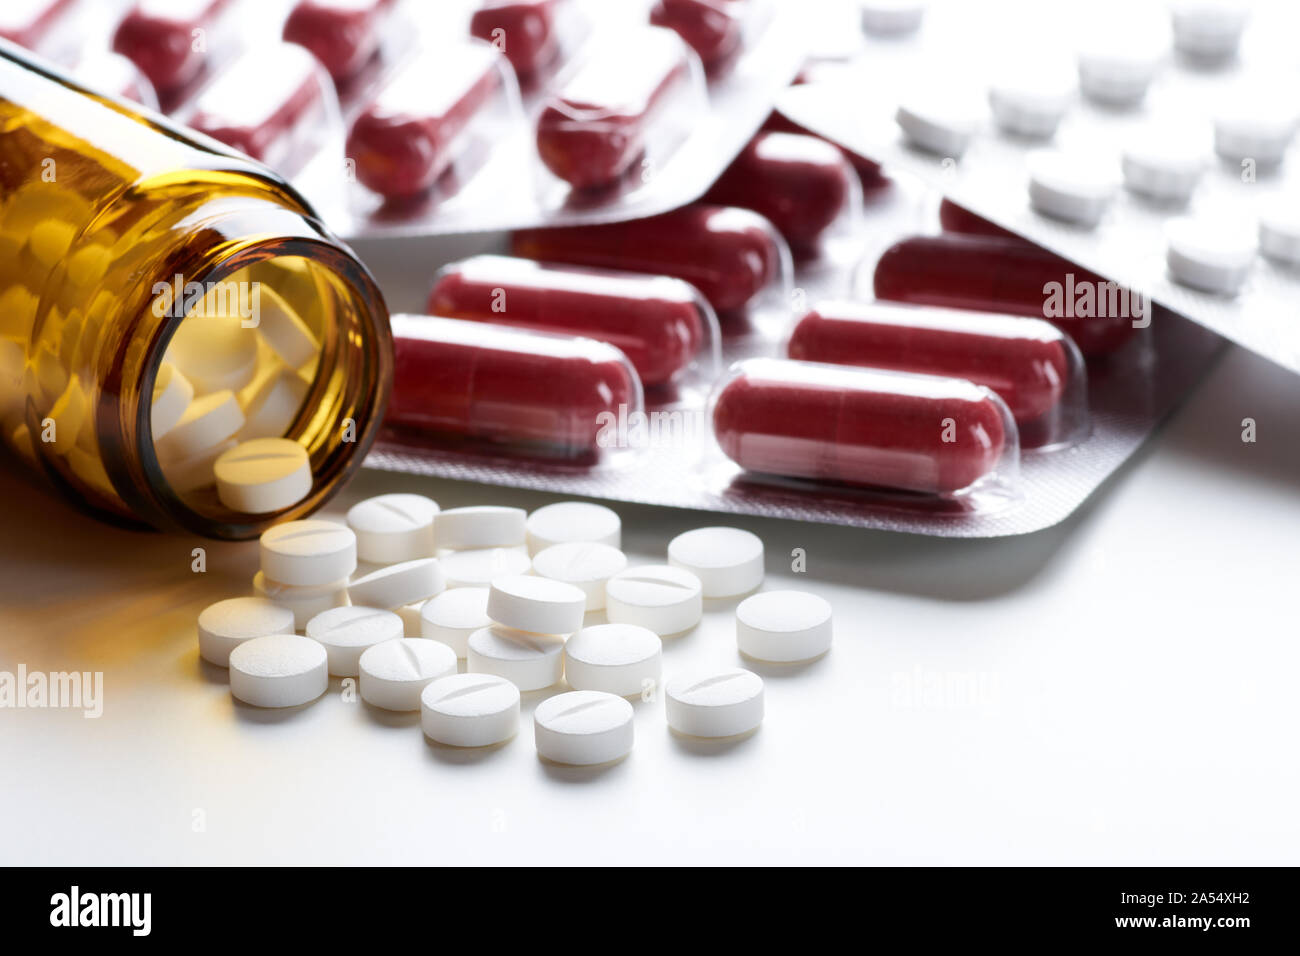 Pile of tablets and pills in bottle, glass and blister pack on white table top with space for text Stock Photo